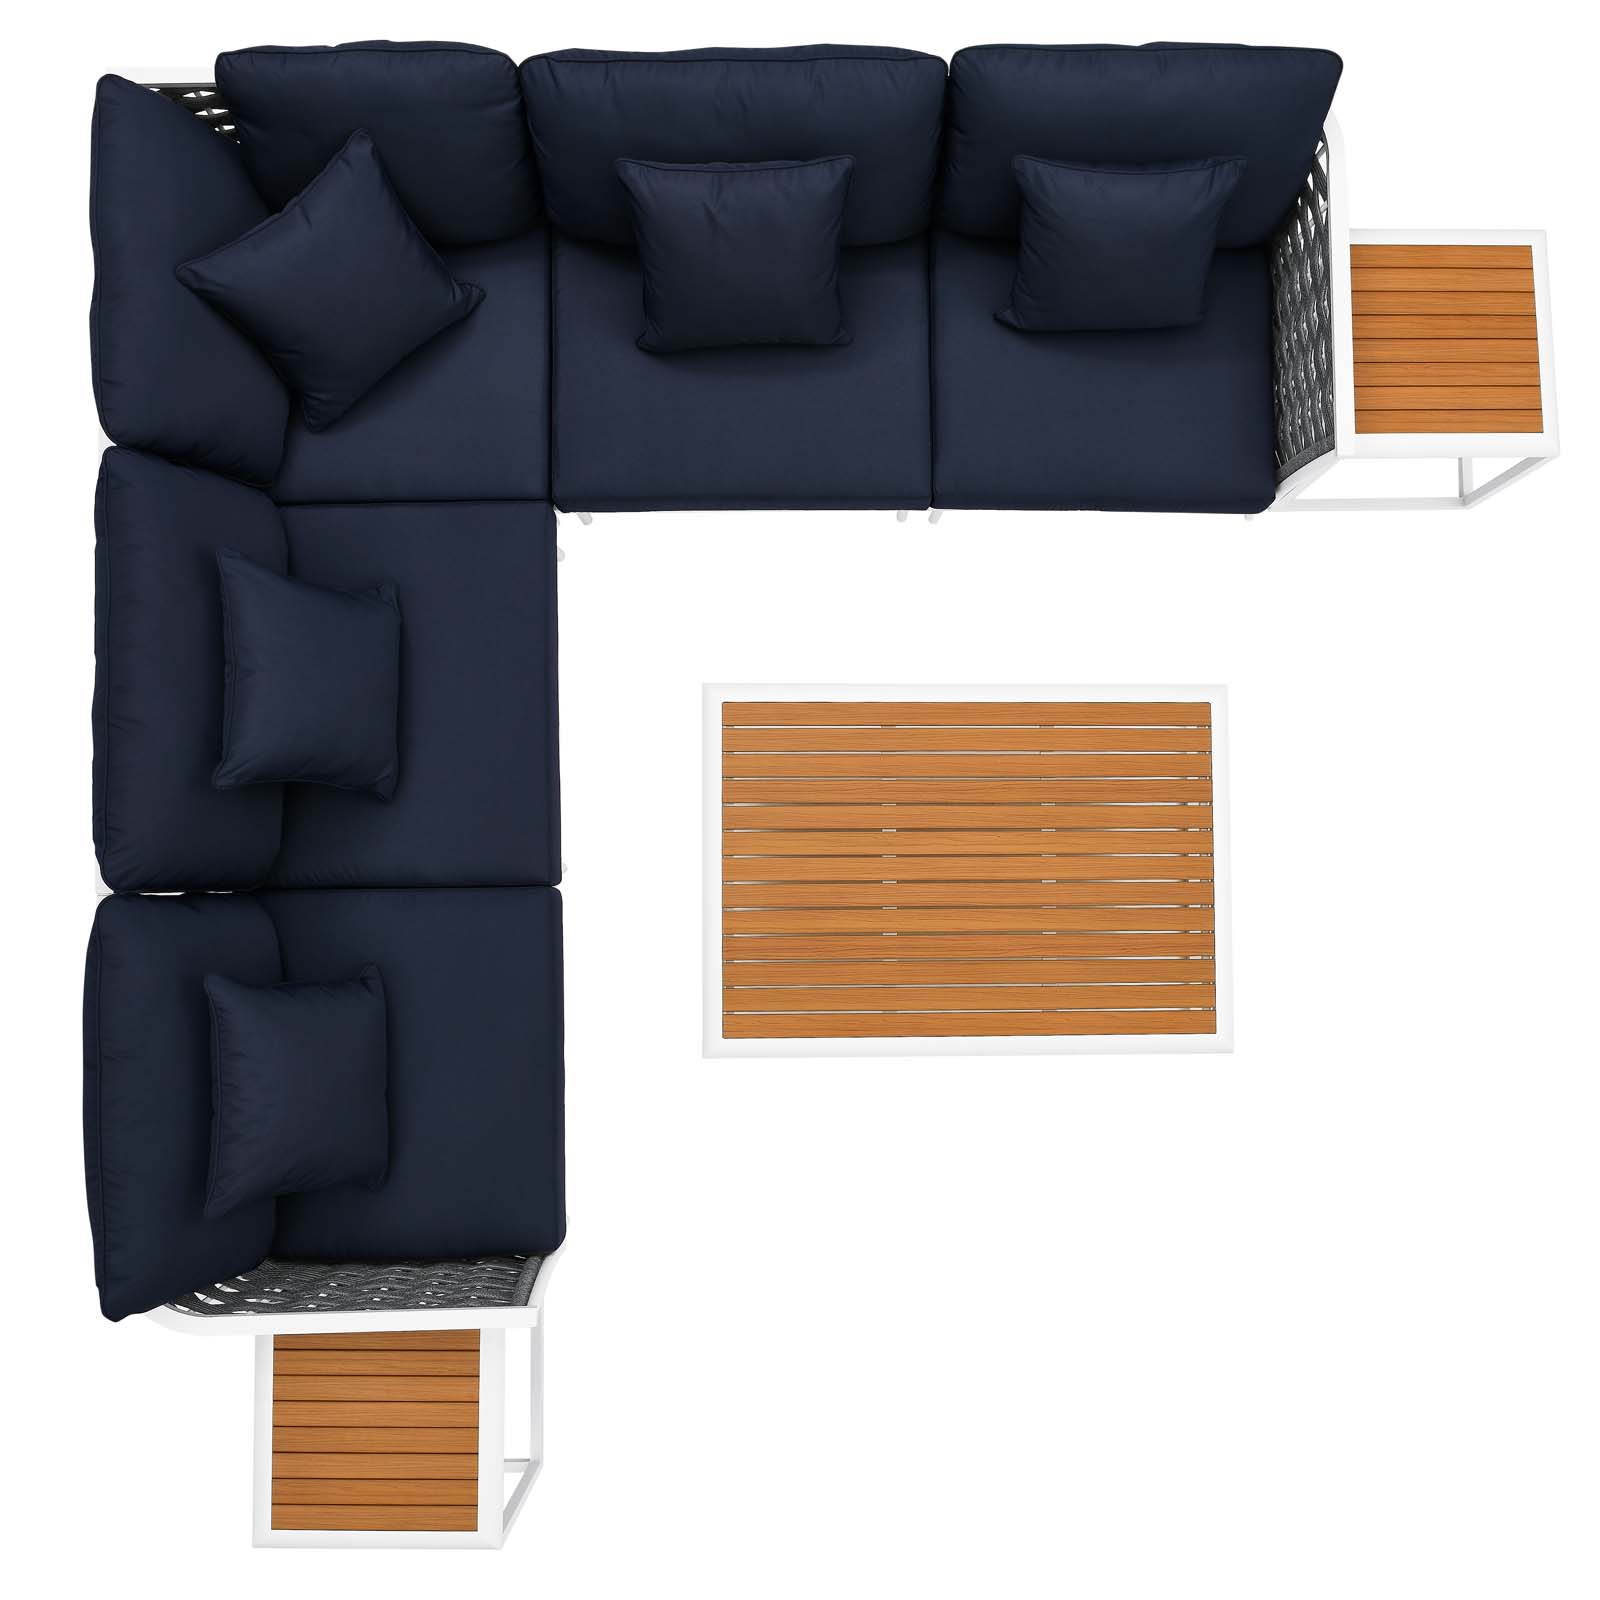 Lounge Sectional Sofa Chair Table Set, Navy White, Aluminum, Metal, Fabric, Modern Contemporary, Outdoor Patio Balcony Cafe Bistro Garden Furniture Hotel Hospitality - image 5 of 10